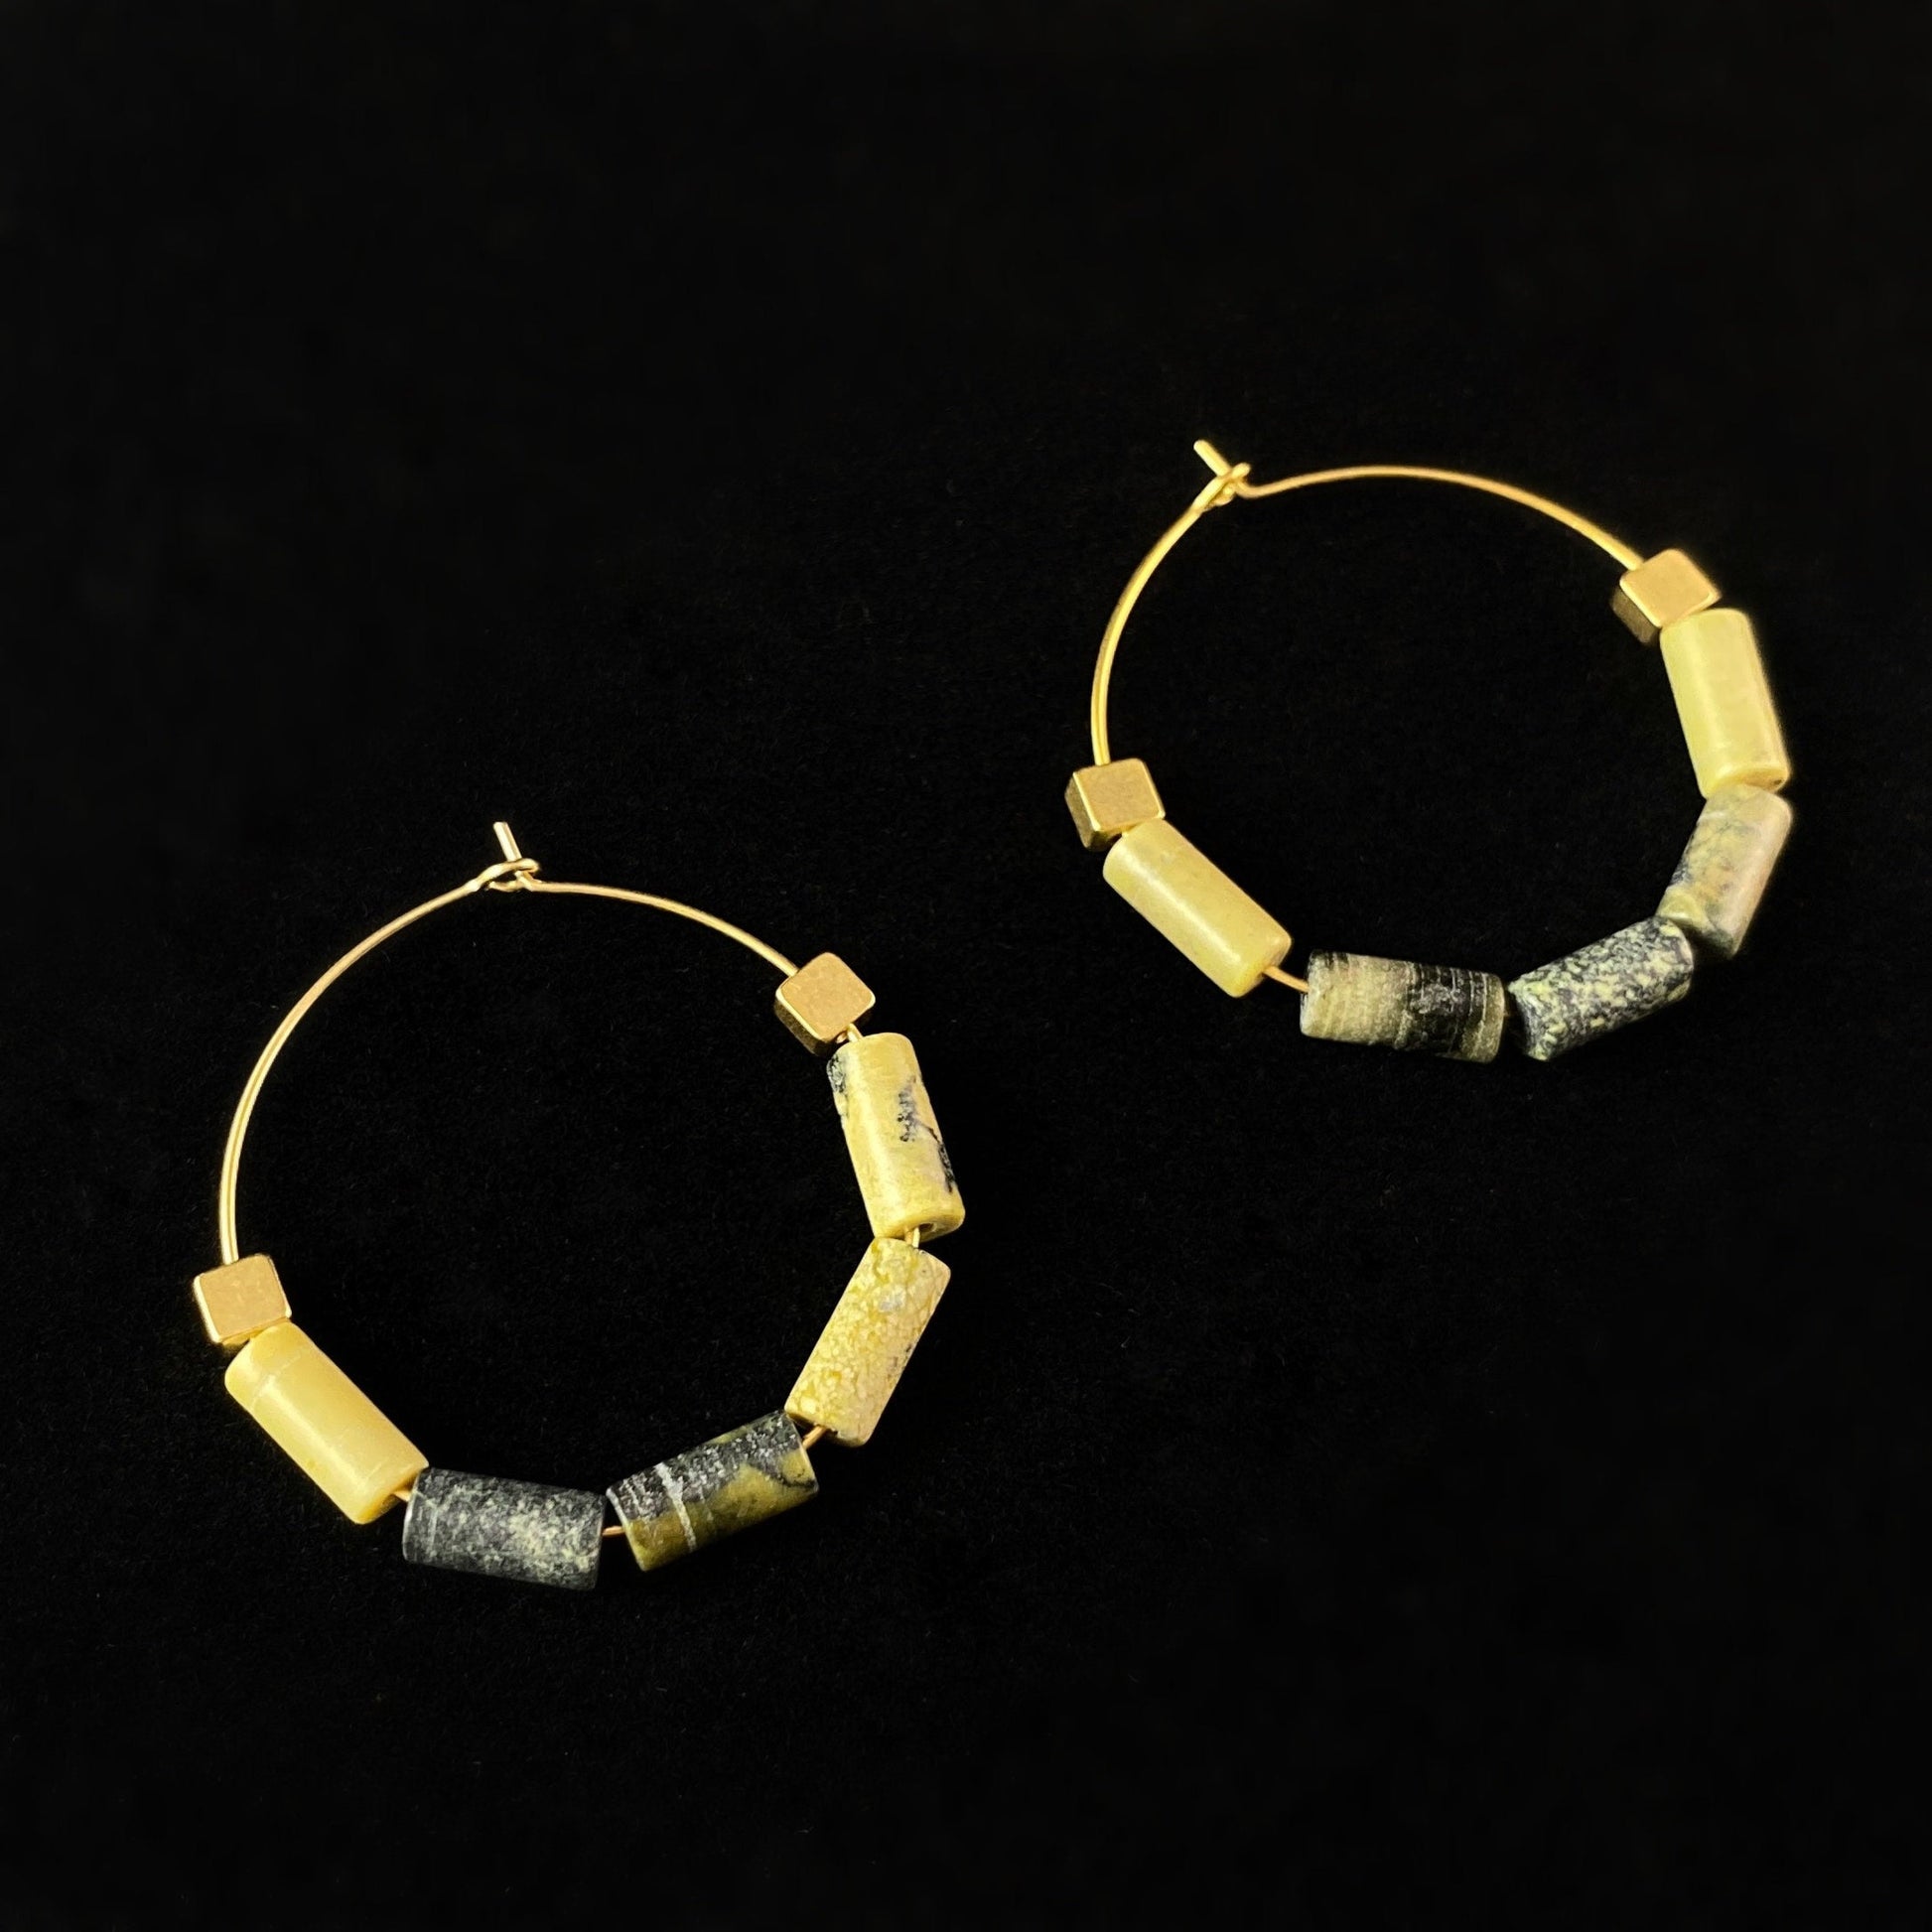 Green and Gold Beaded Hoop Earrings - 18kt Gold Over Brass with Jasper and Brass Beads , David Aubrey Jewelry